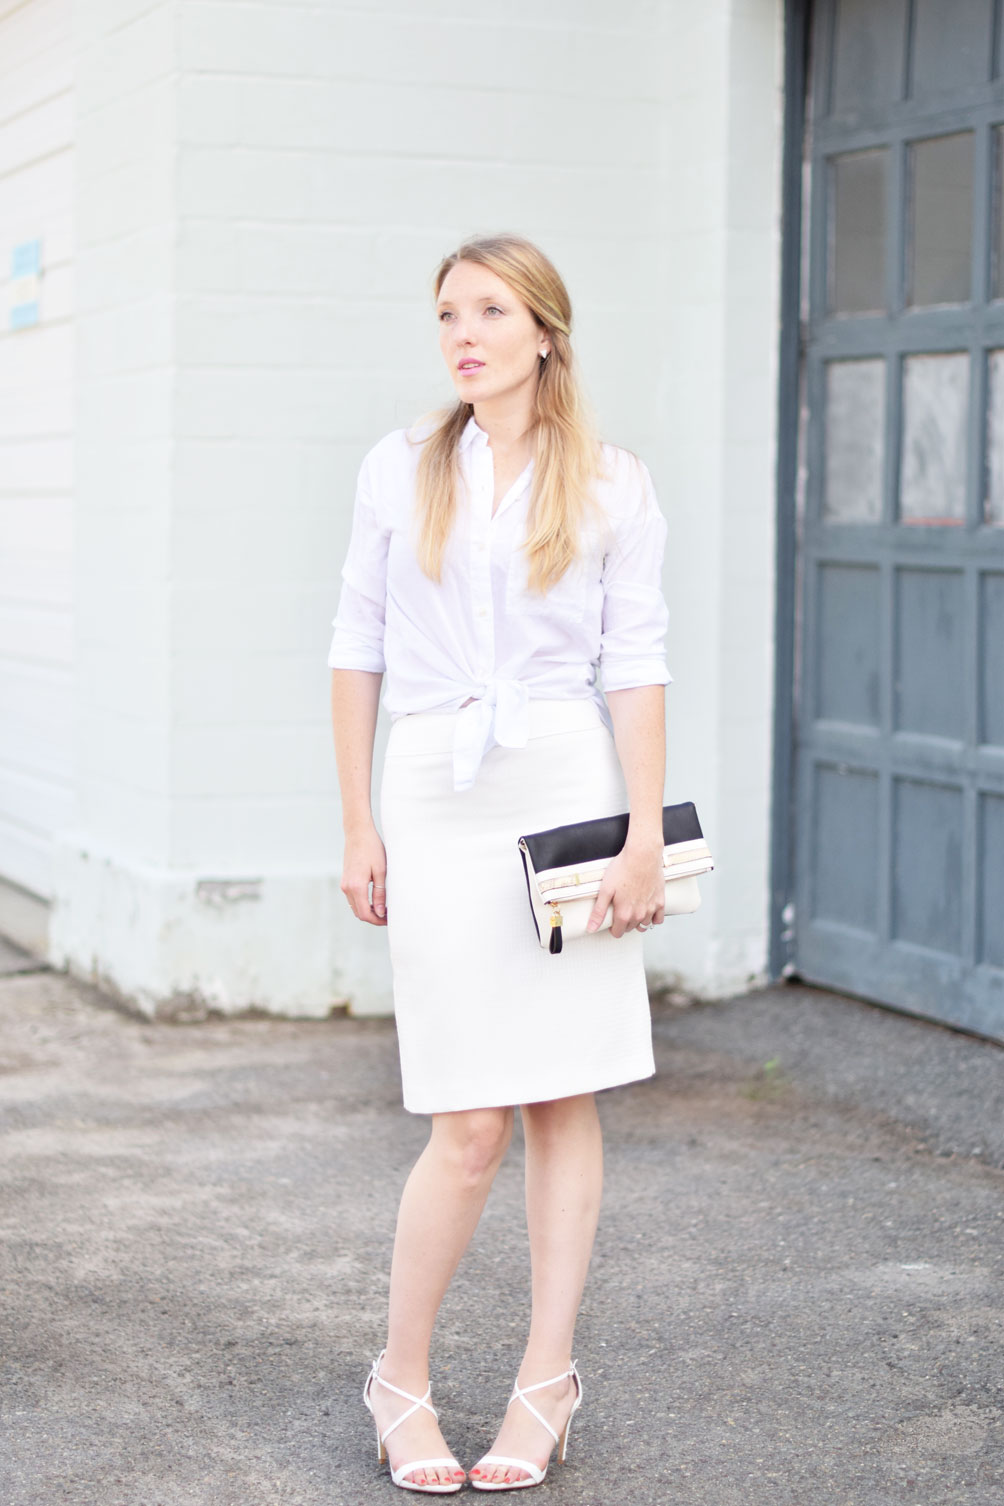 fashion blogger Leslie Musser of one brass fox shares her tips on mixing summer whites